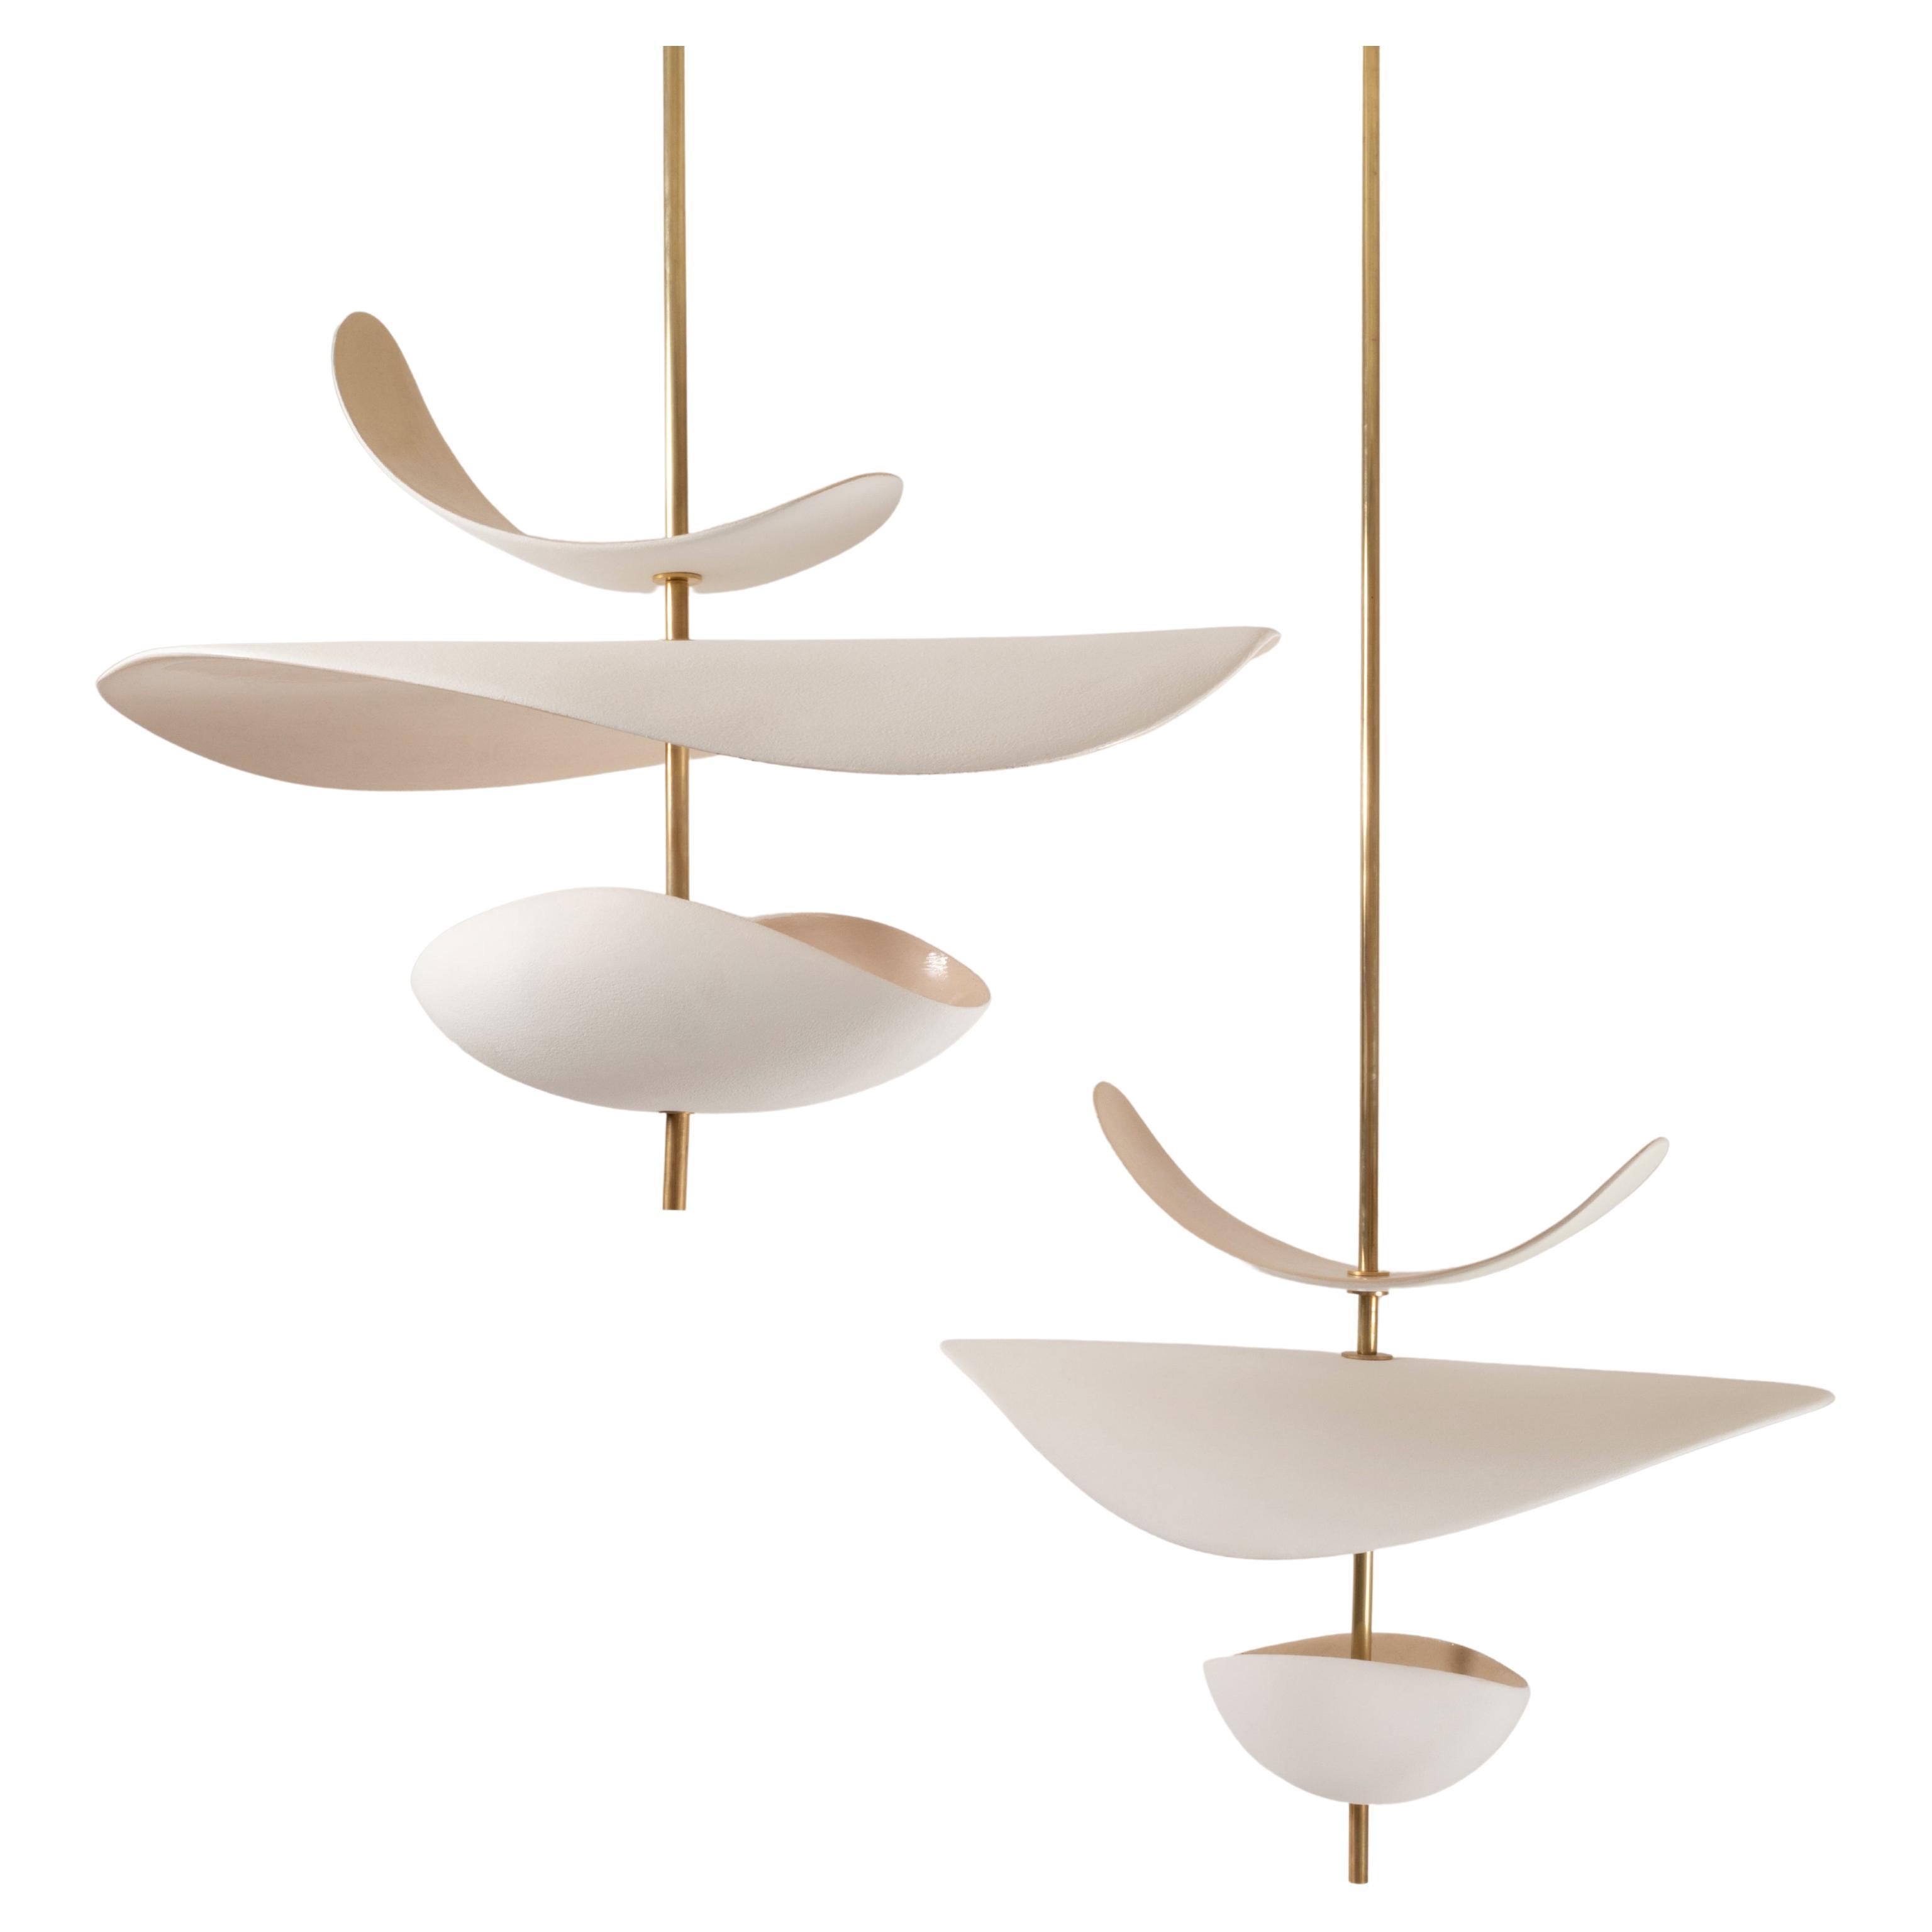 Sculptural ceramic suspension.
Poetic and organic design handmade by Elsa Foulon Studio in her Parisian workshop.
Enameled ceramic, brass structure.
The size of the ceramic part can be customized ( max lenght : 29.5 Inch - additional cost )
Standard